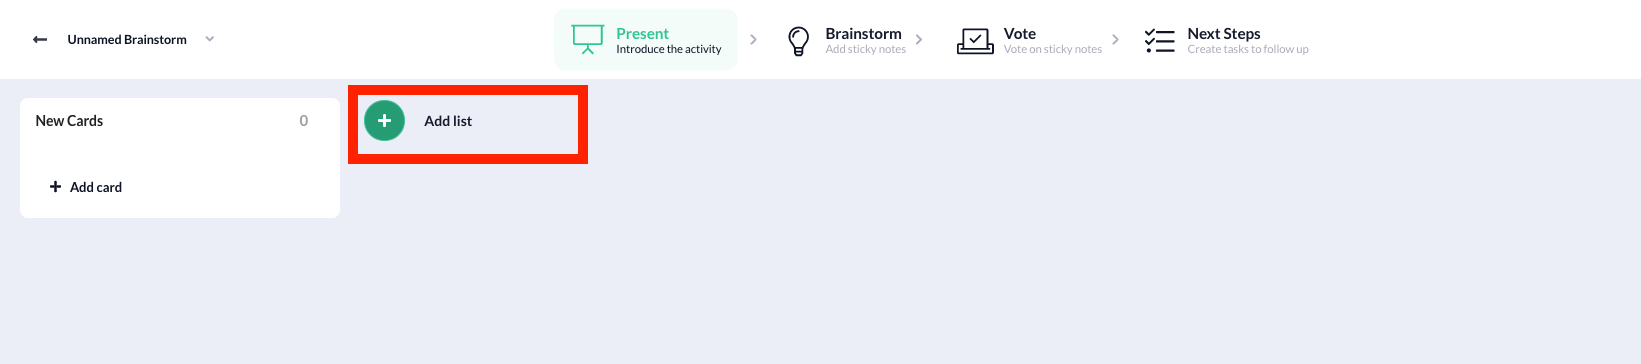 screenshot showing the Add list button in the Blank Brainstorm activity